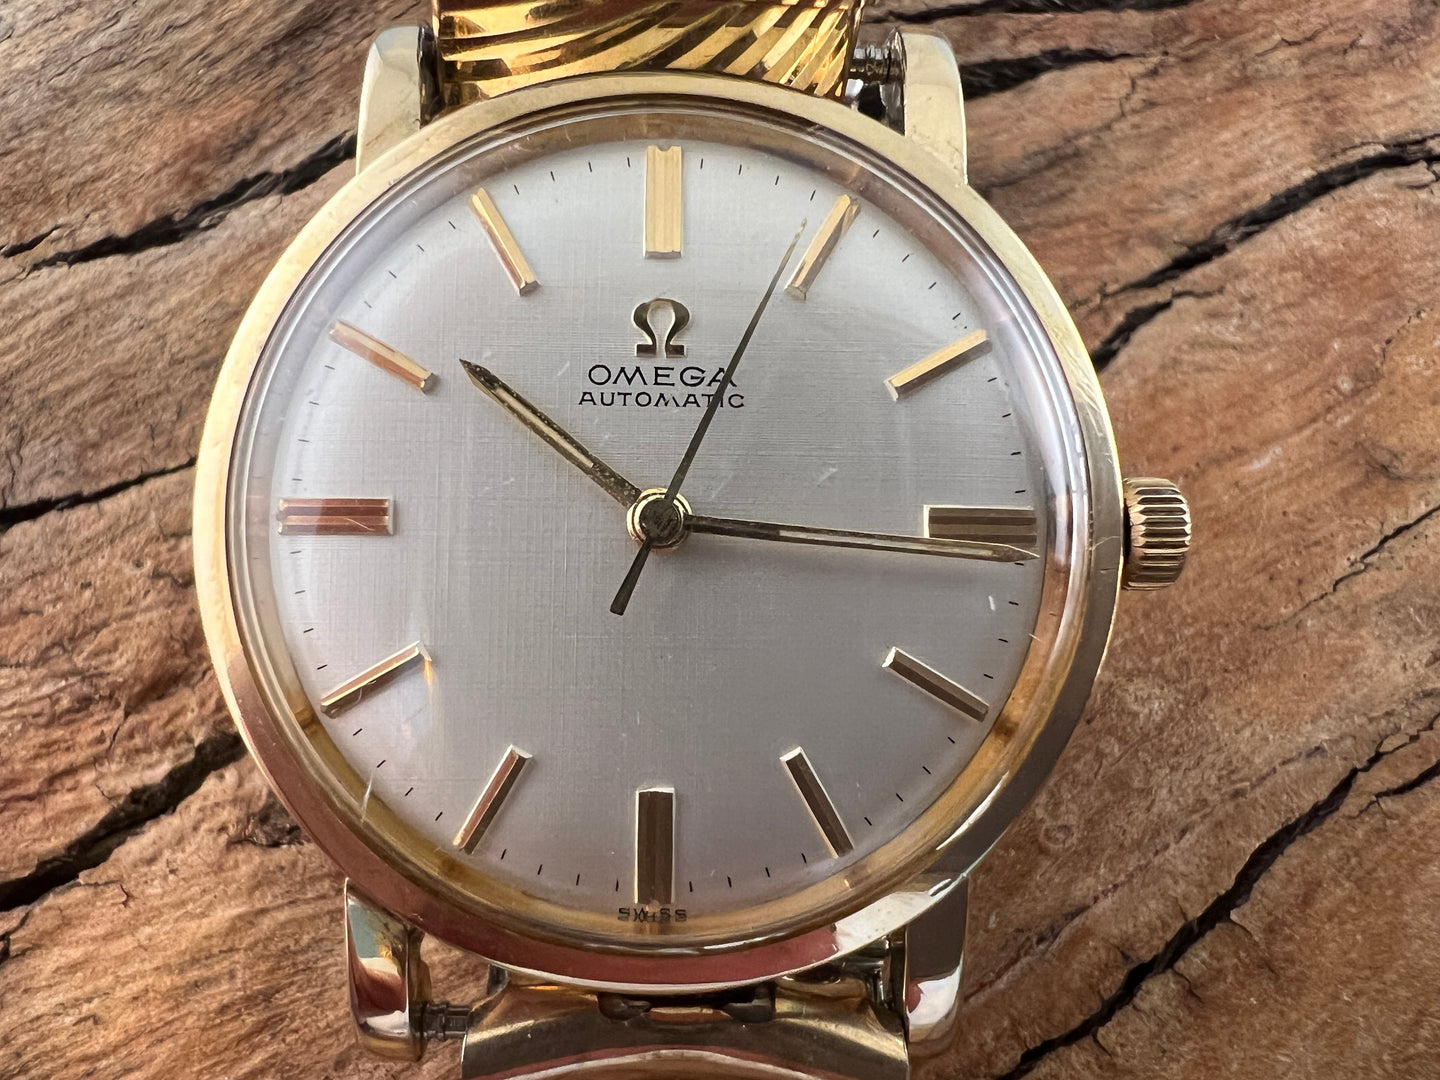 Omega Classic Style with Perfect Pearl White Dial and Golden Baton Markers, Automatic, 33.5mm